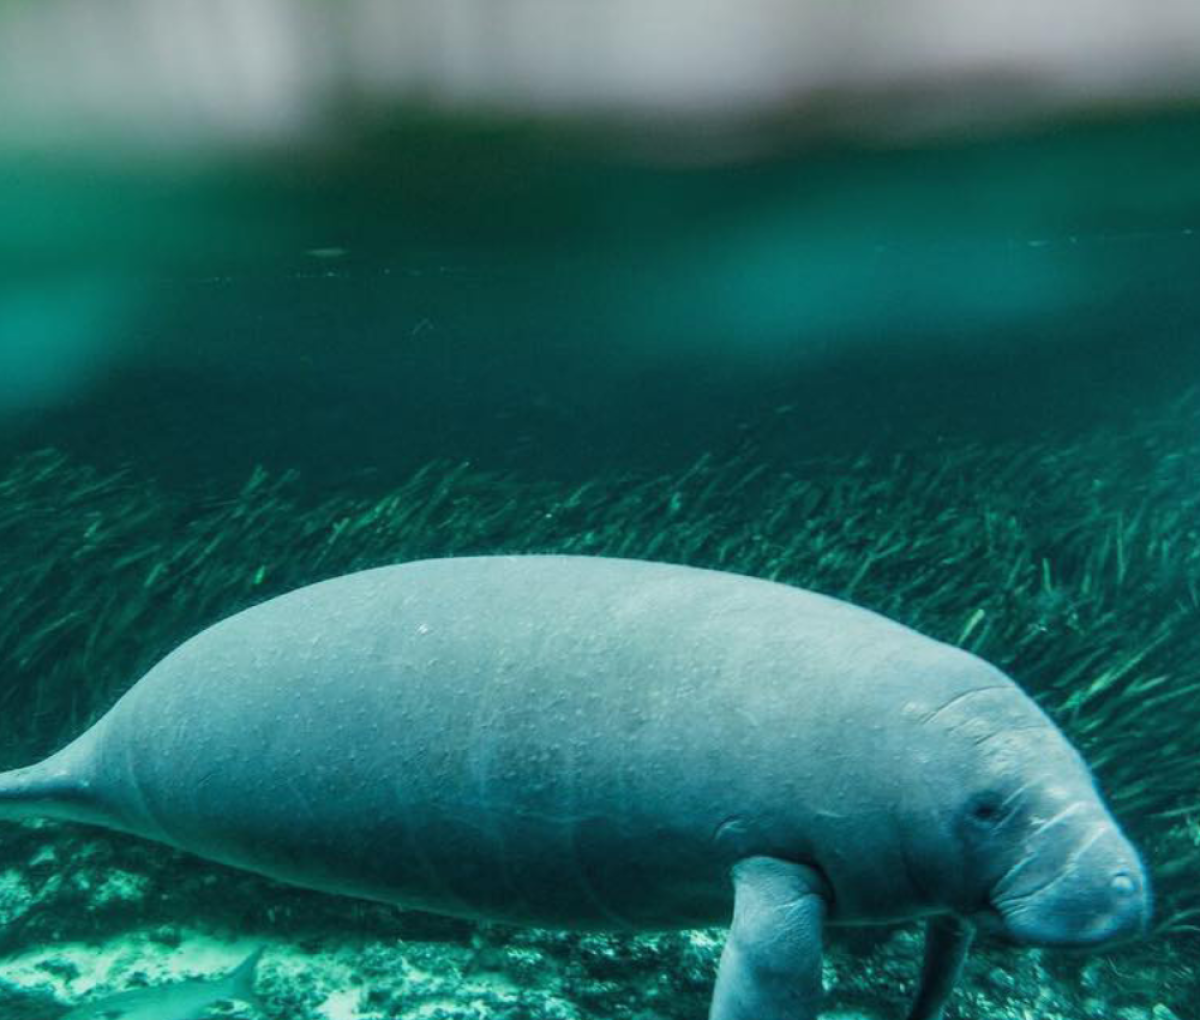 A manatee swimming in crystal clear waters